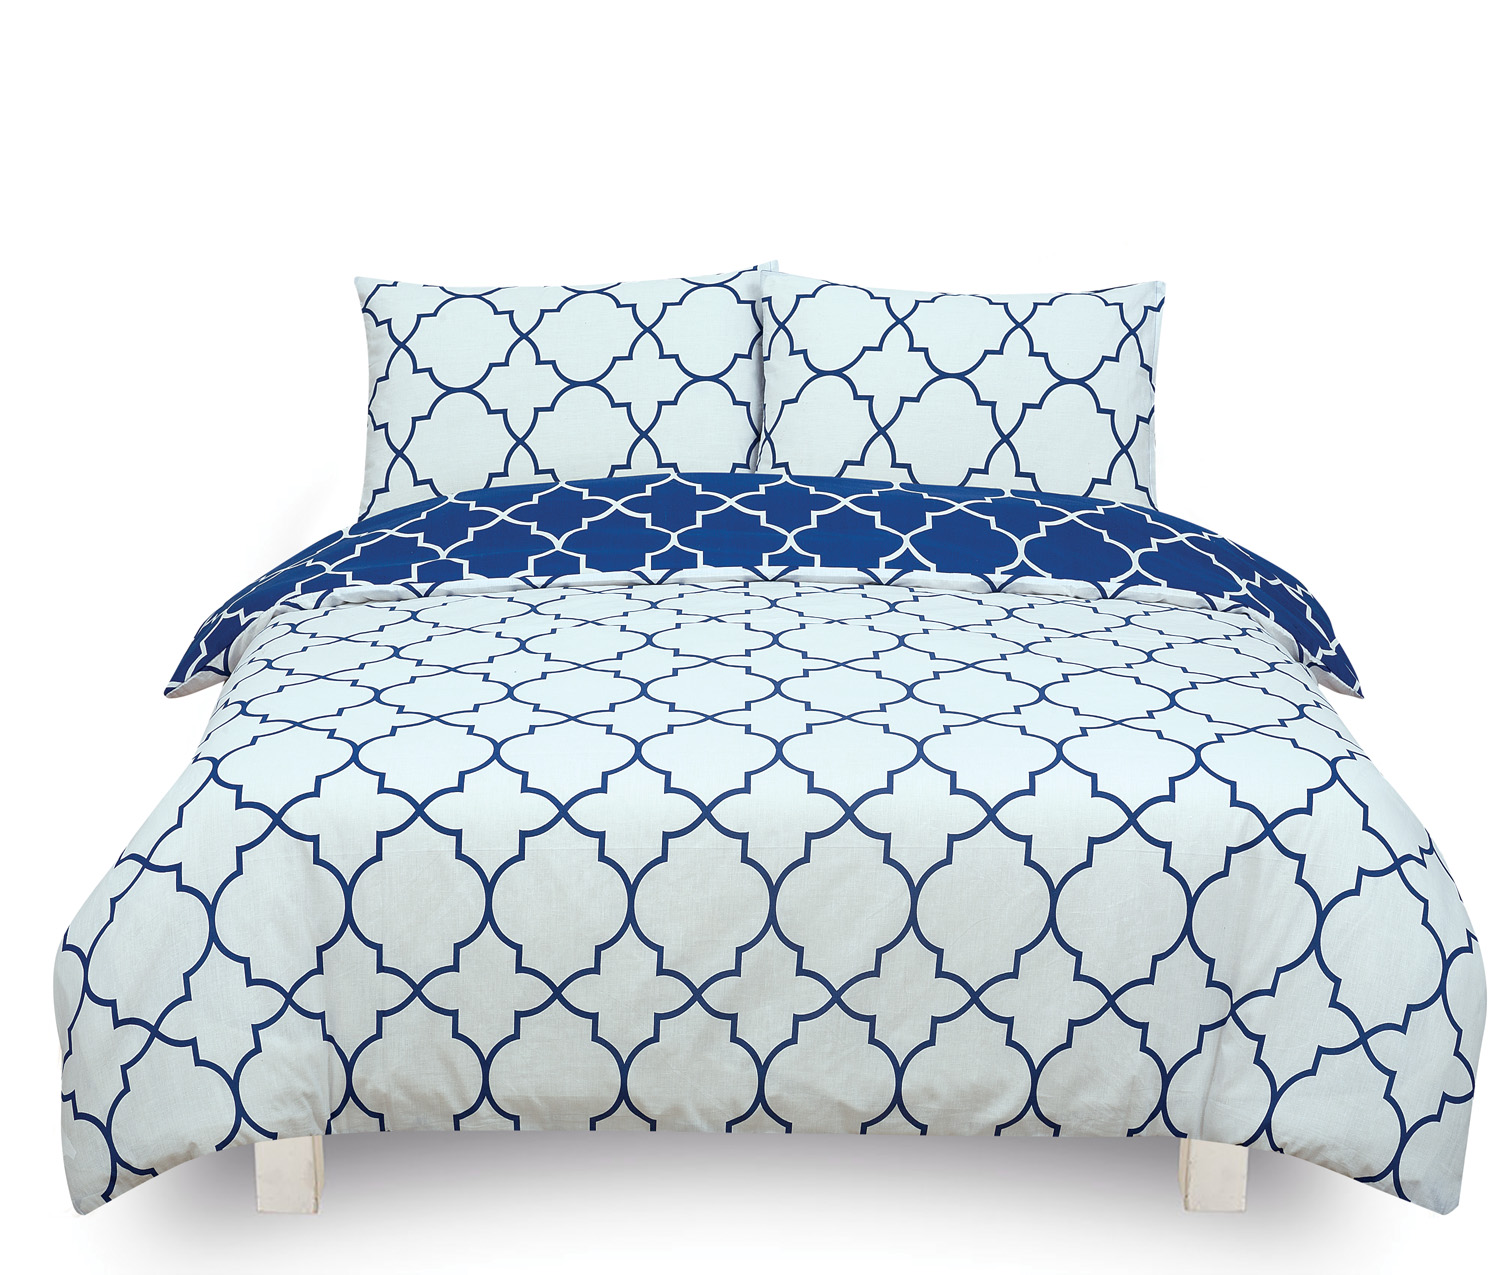 Morrocan Blue Reversible Rotary Double Bed Duvet Quilt Cover Set